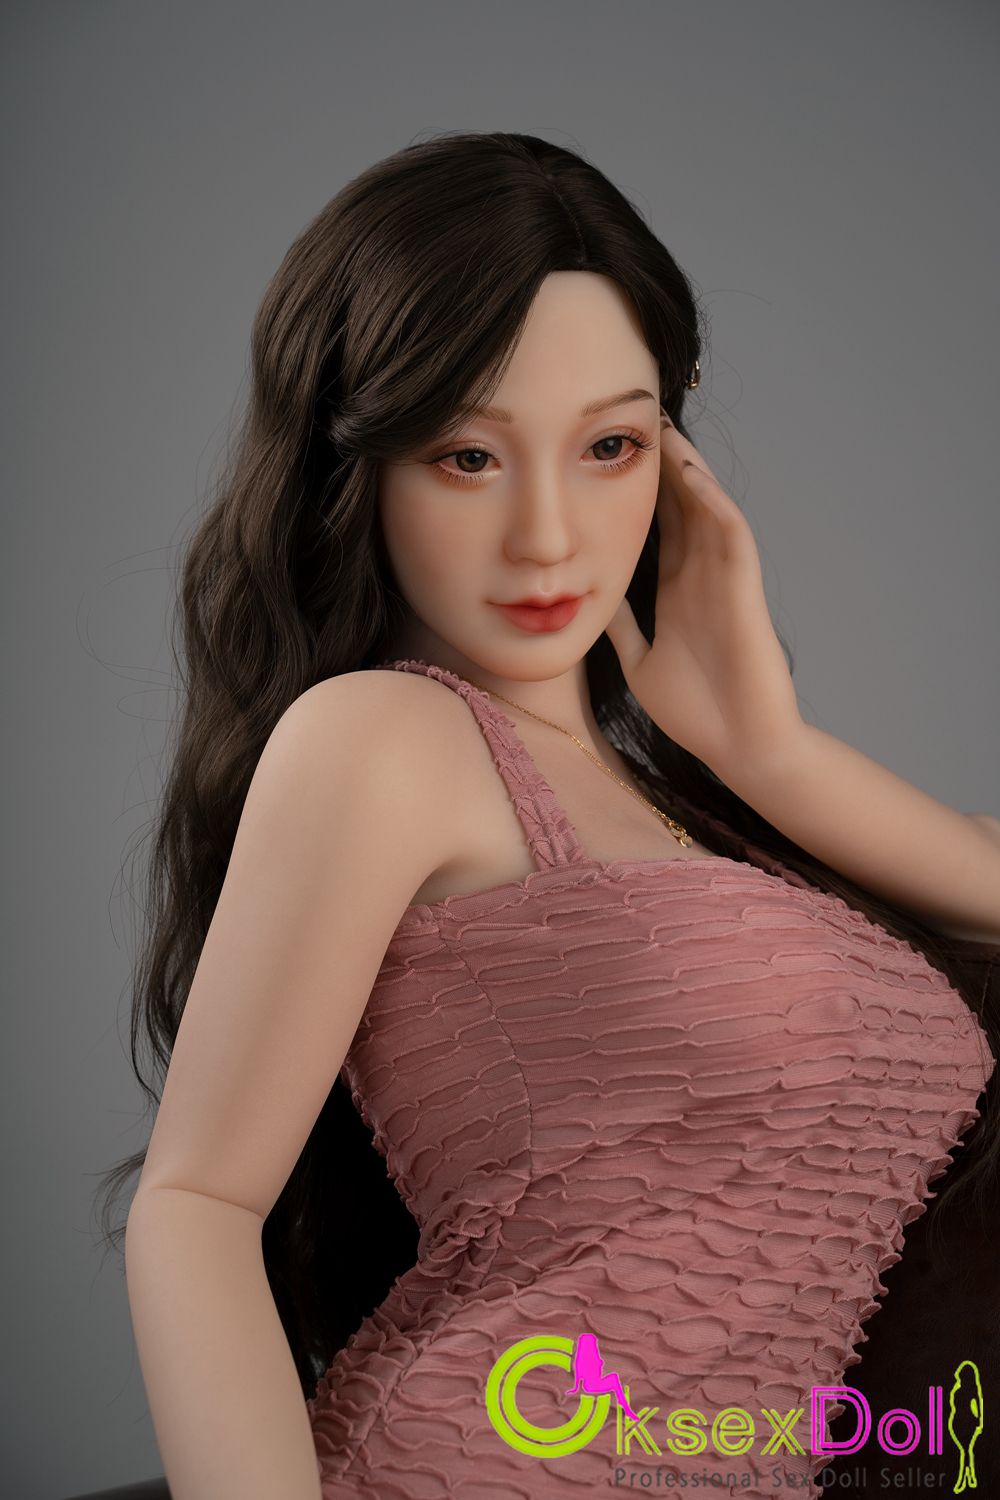 Chinese love dolls pic